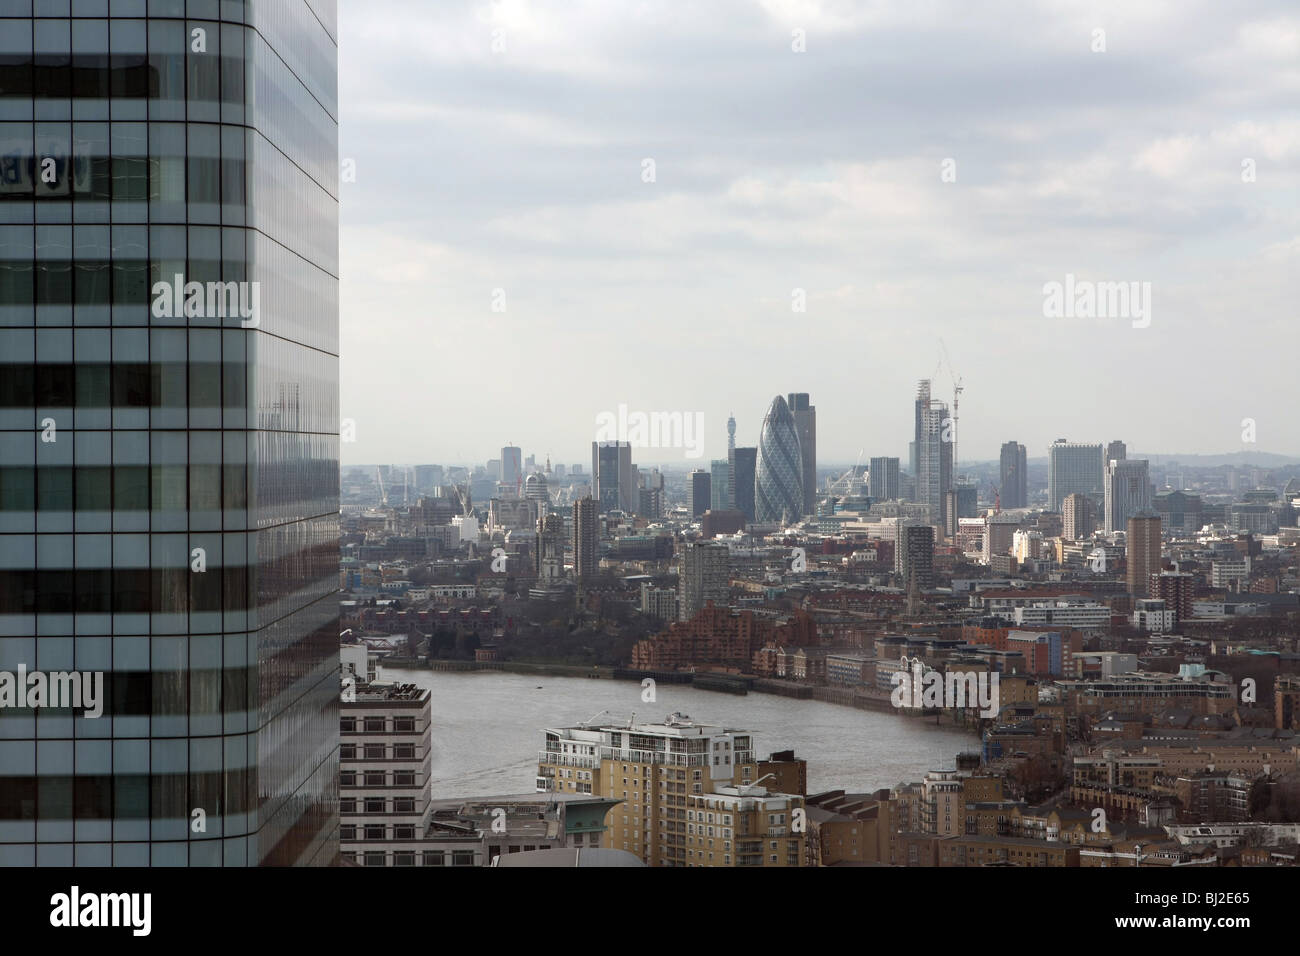 A View Across London From 27th Floor Of Barclays Bank Canary